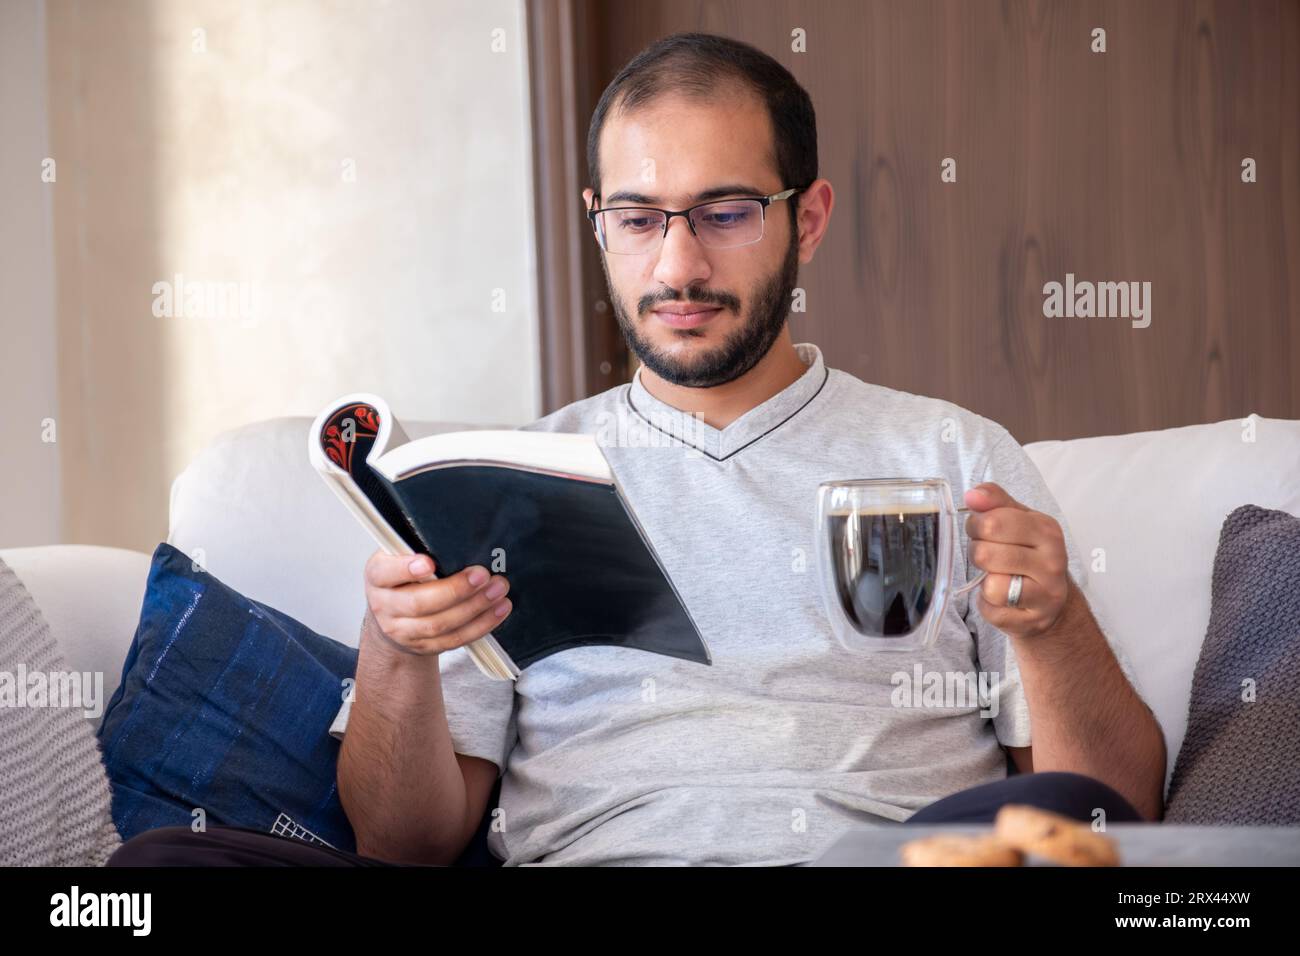 Bearded arab man drinking coffee while reading book and sitting on living room couch Stock Photo